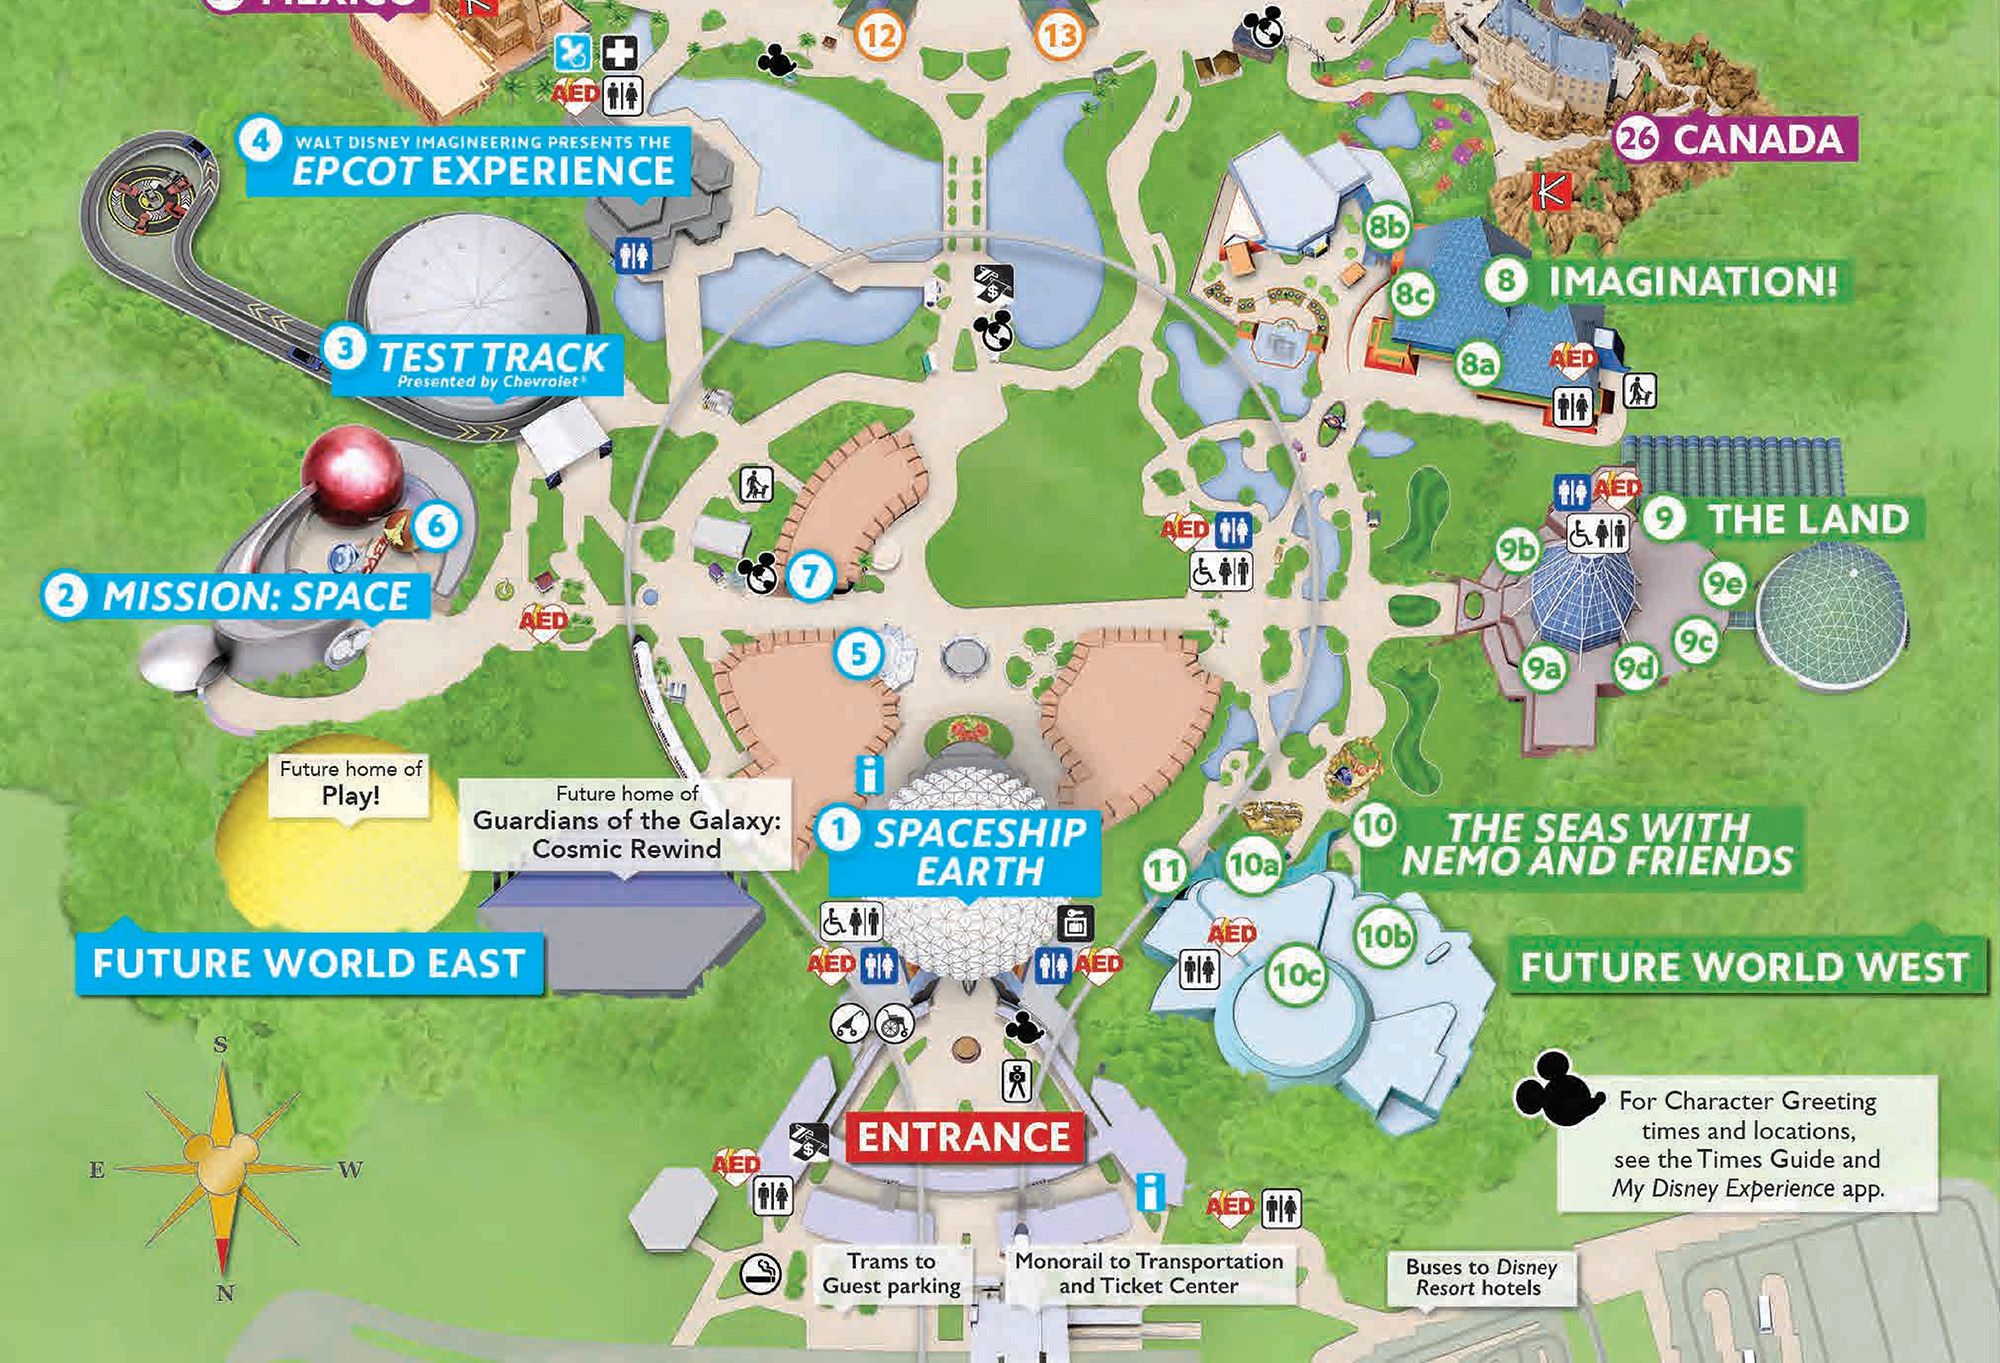 Updated Epcot Guide Map Showcases Future Projects (Space 220, PLAY